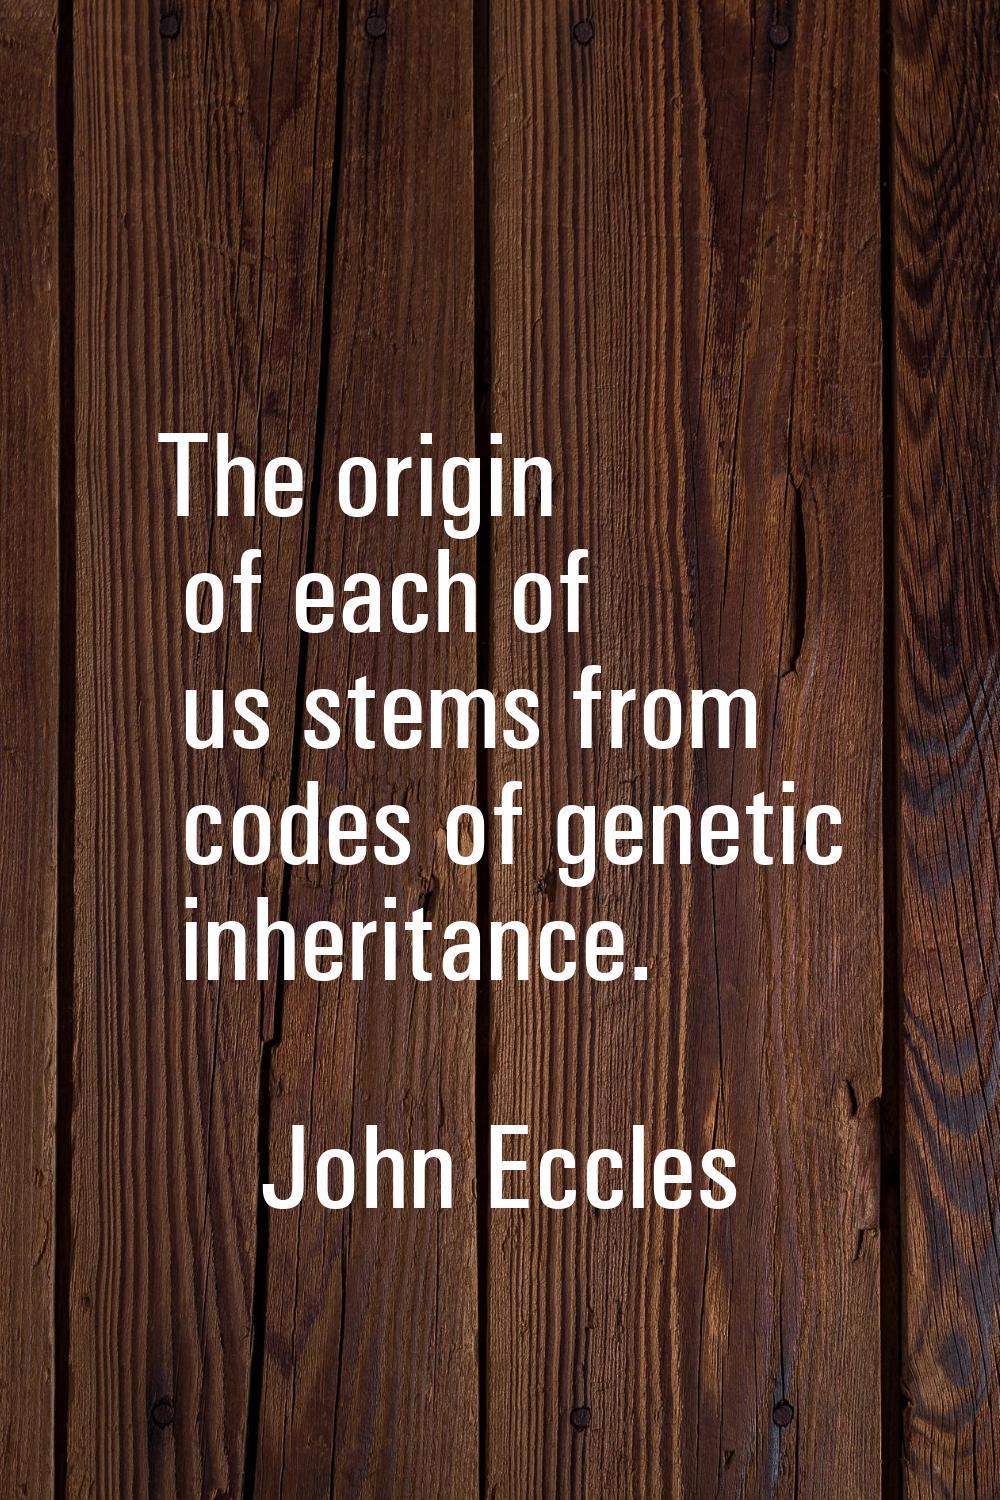 The origin of each of us stems from codes of genetic inheritance.